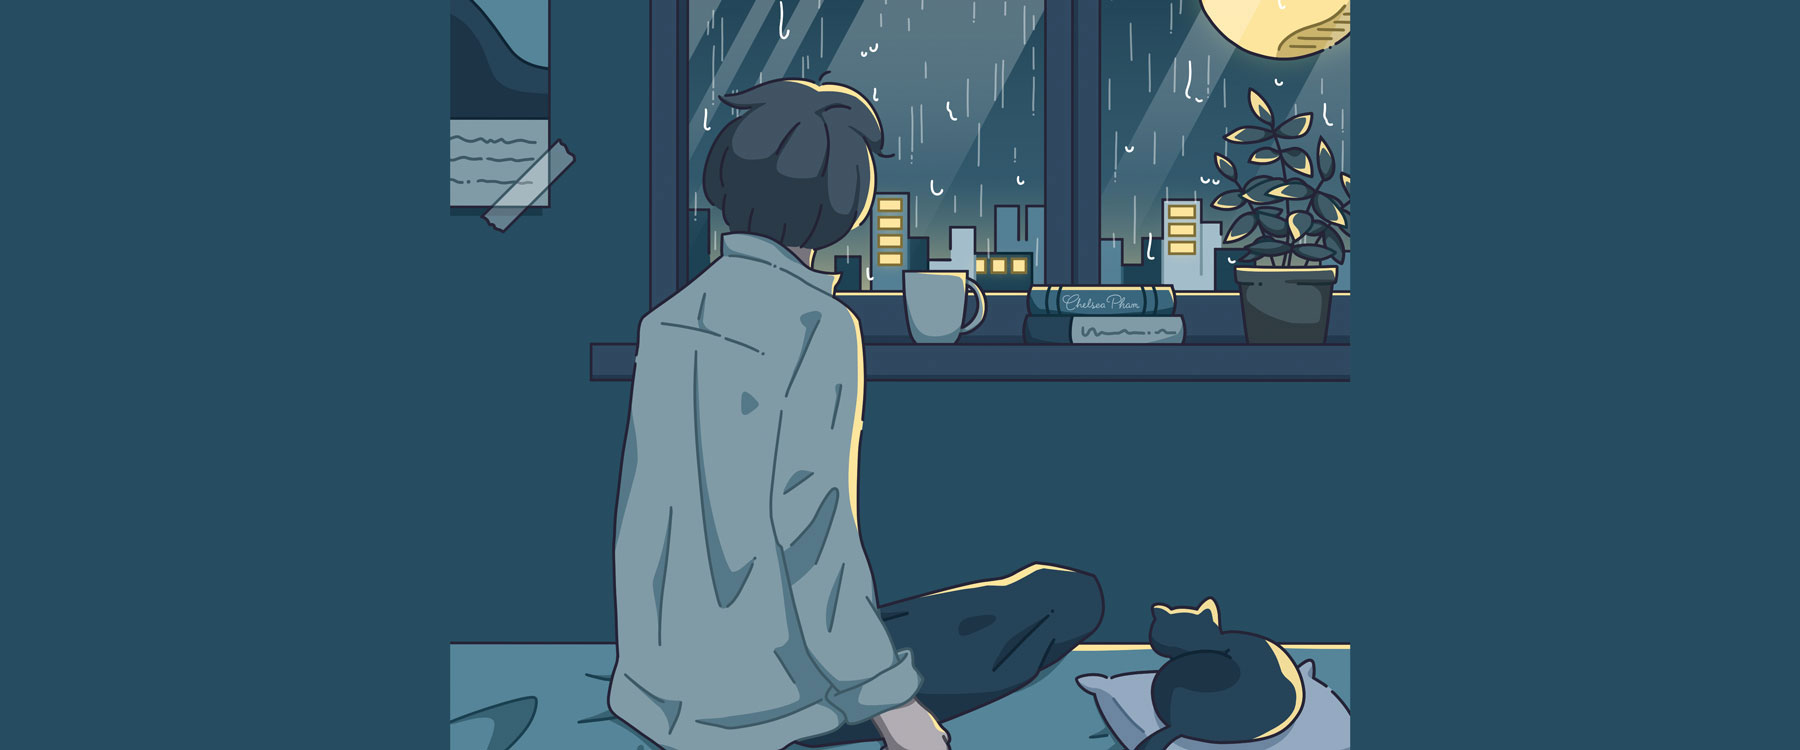 Illustration by Chelsea Pham: a young person looks out the window at a rainy city in the moonlight